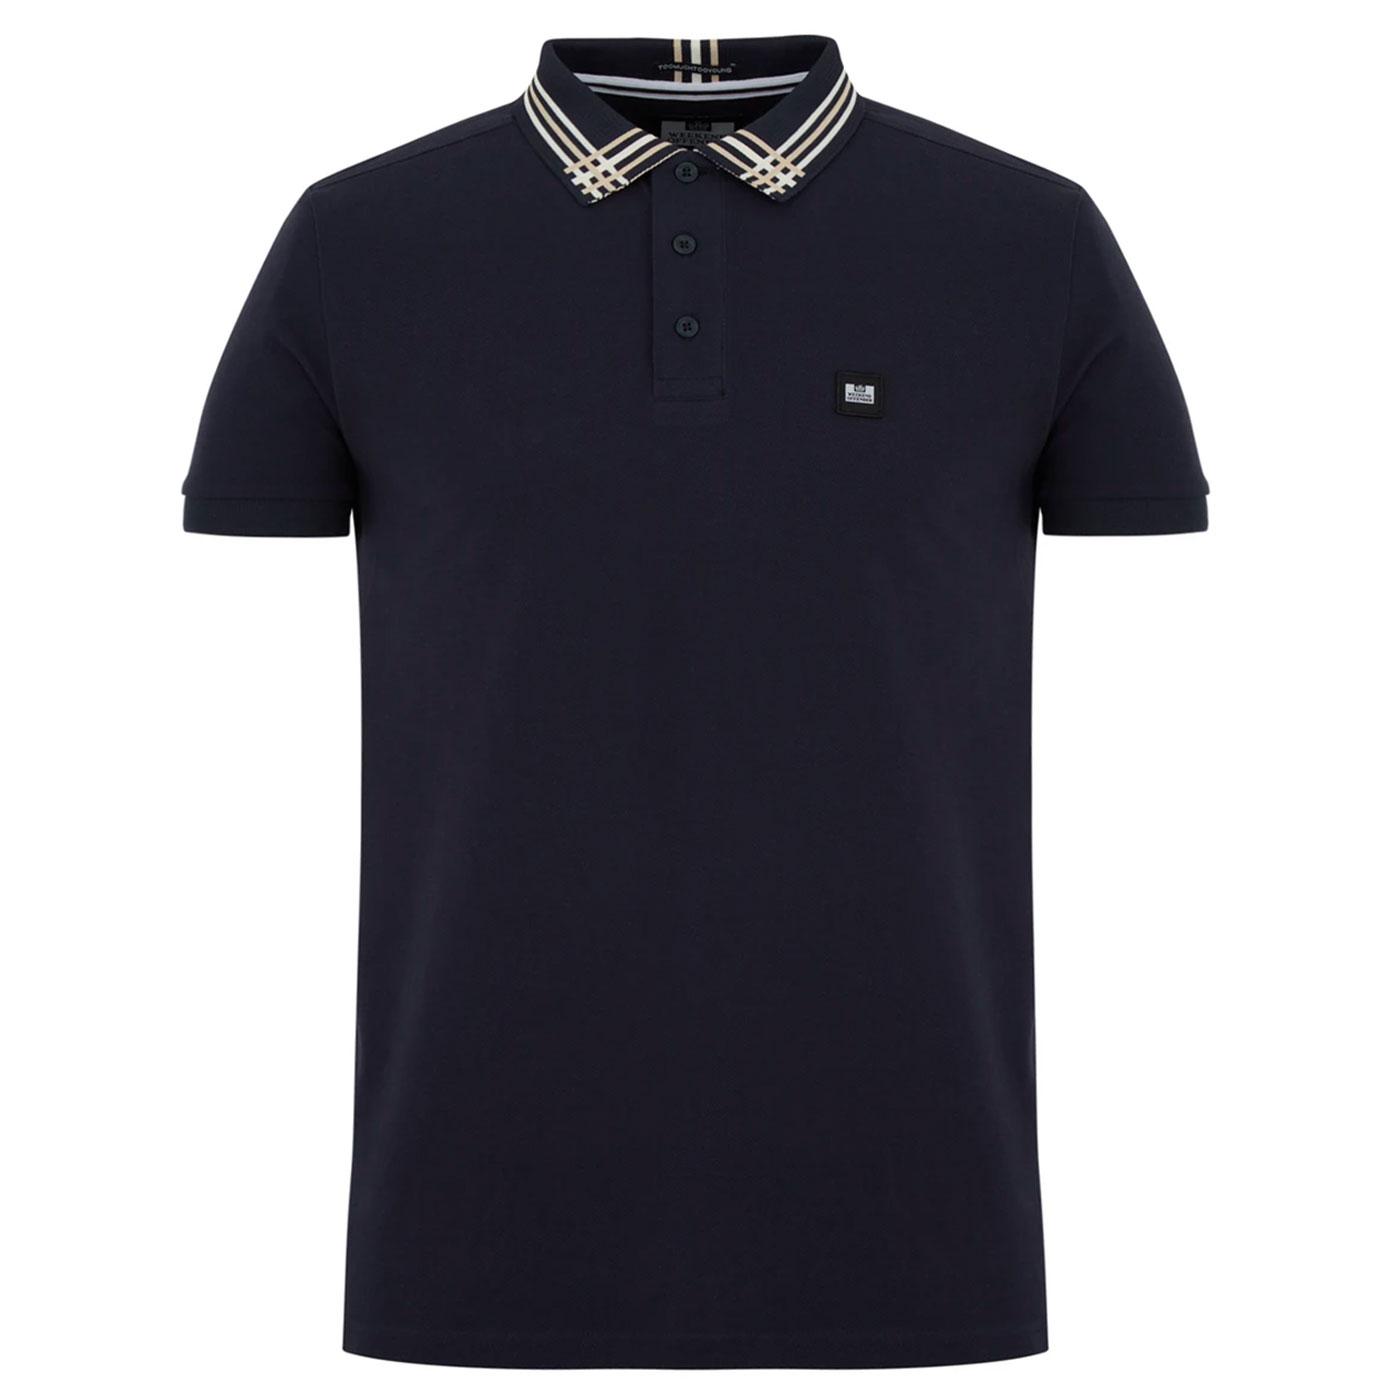 WEEKEND OFFENDER Rivera Mod Tipped Polo Top in Navy